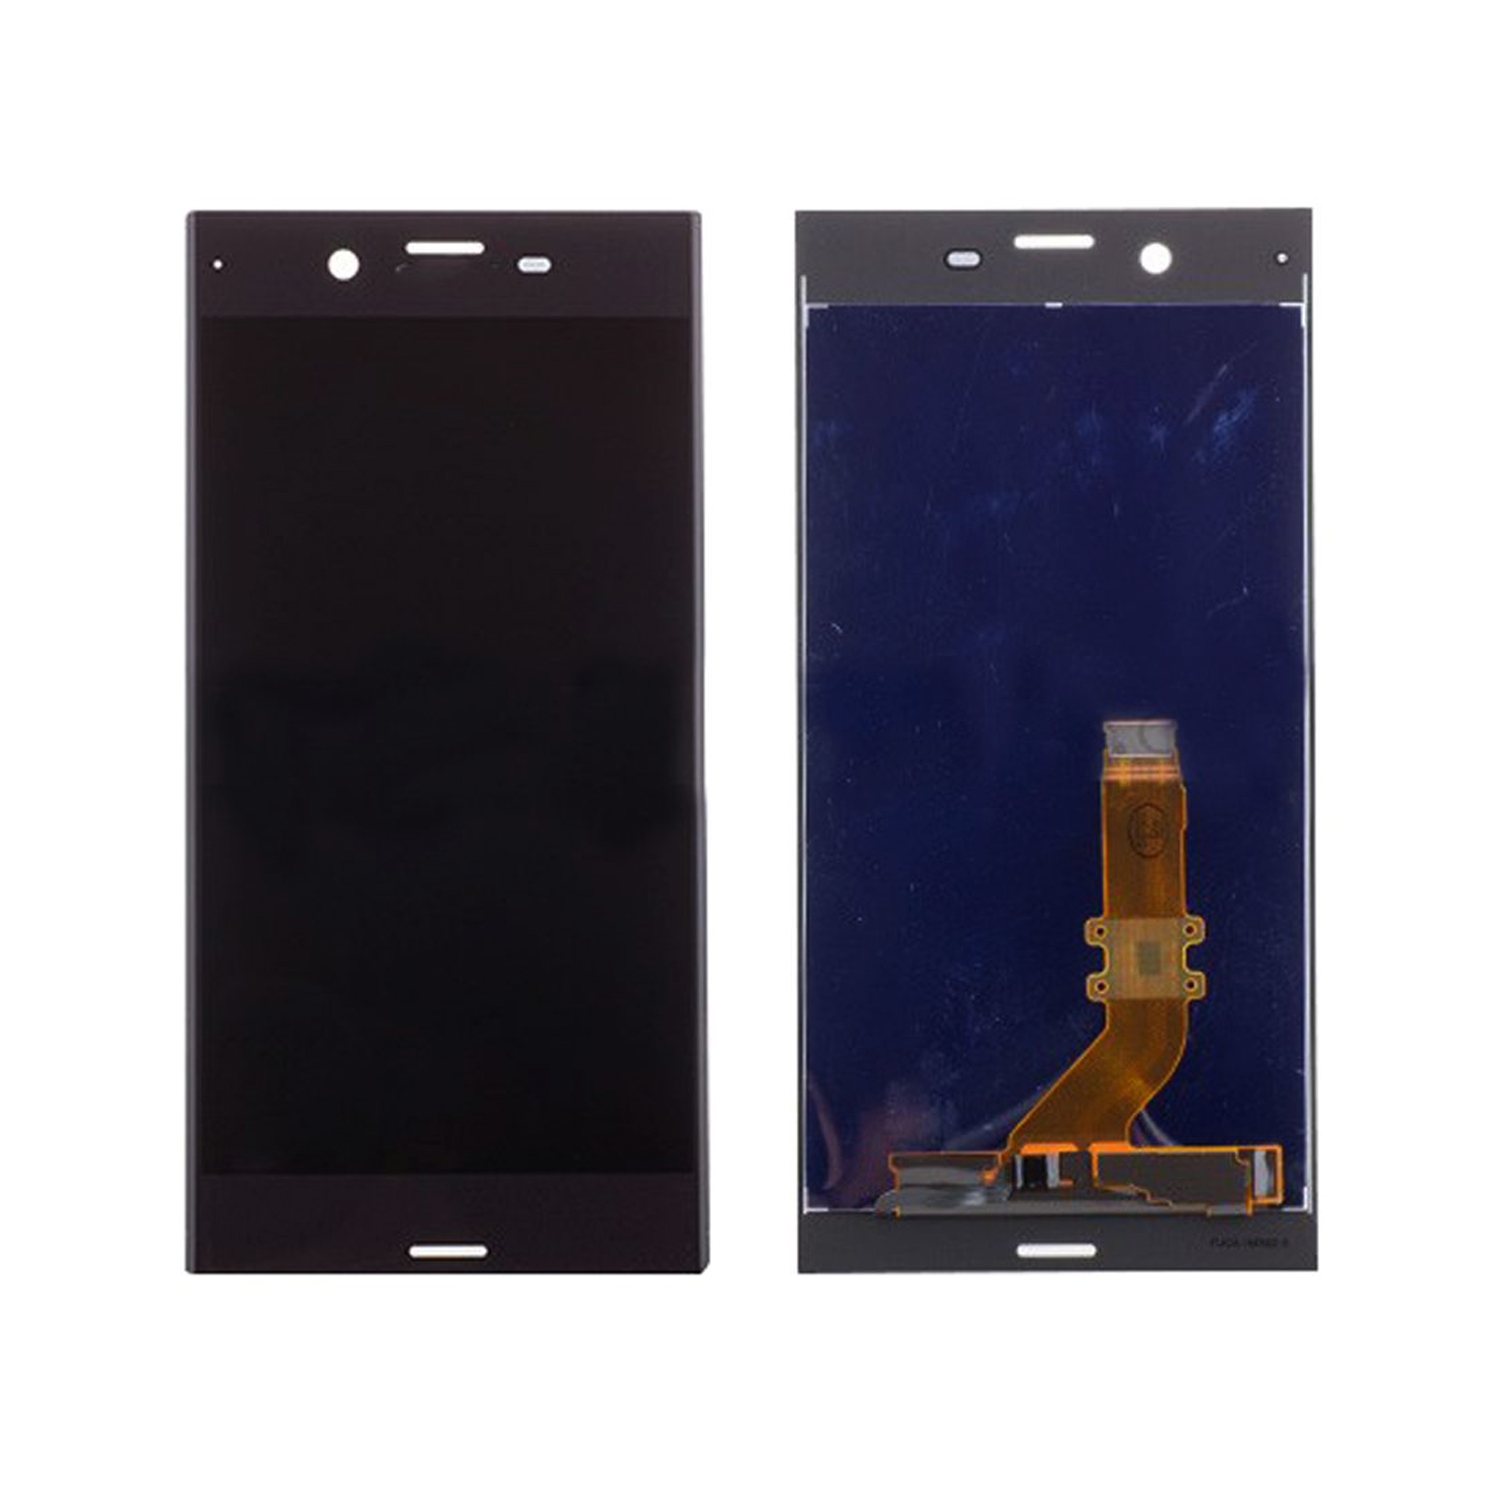 Replacement LCD Display Touch Screen Digitizer Assembly Compatible with Sony Xperia XZ - Black